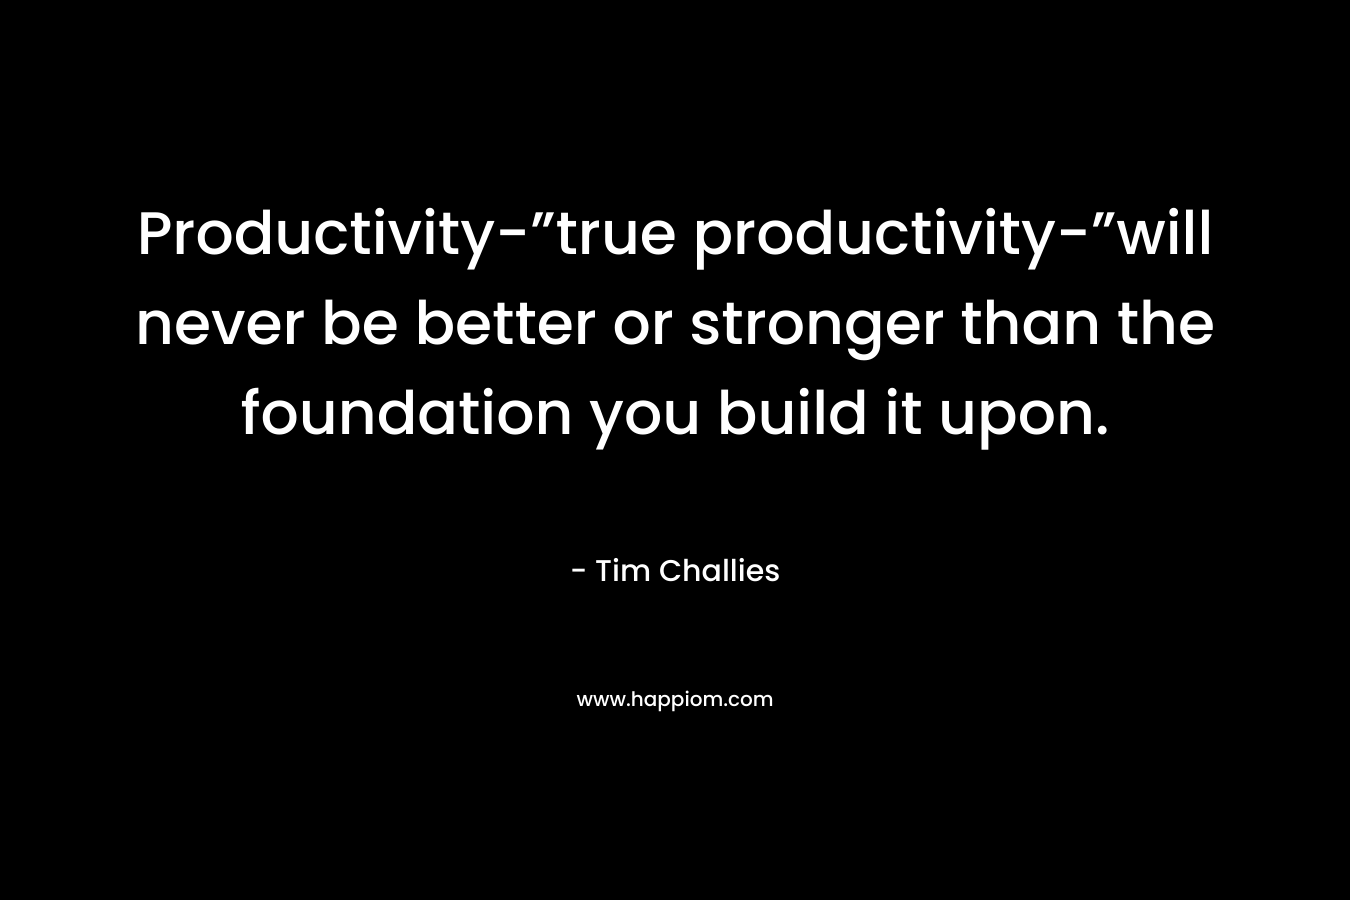 Productivity-”true productivity-”will never be better or stronger than the foundation you build it upon.